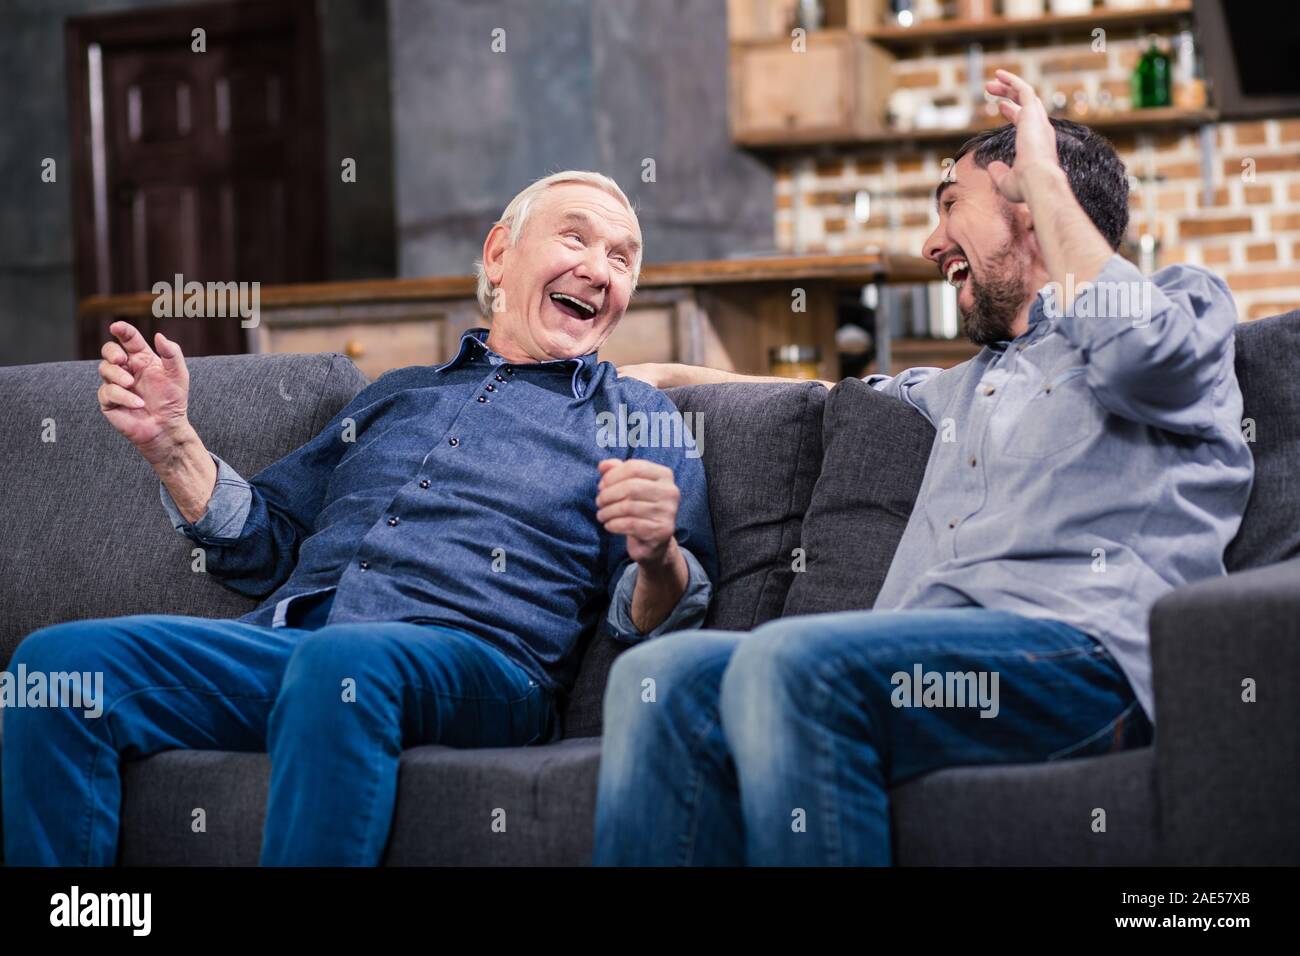 Joyful aged man and his son resting Stock Photo